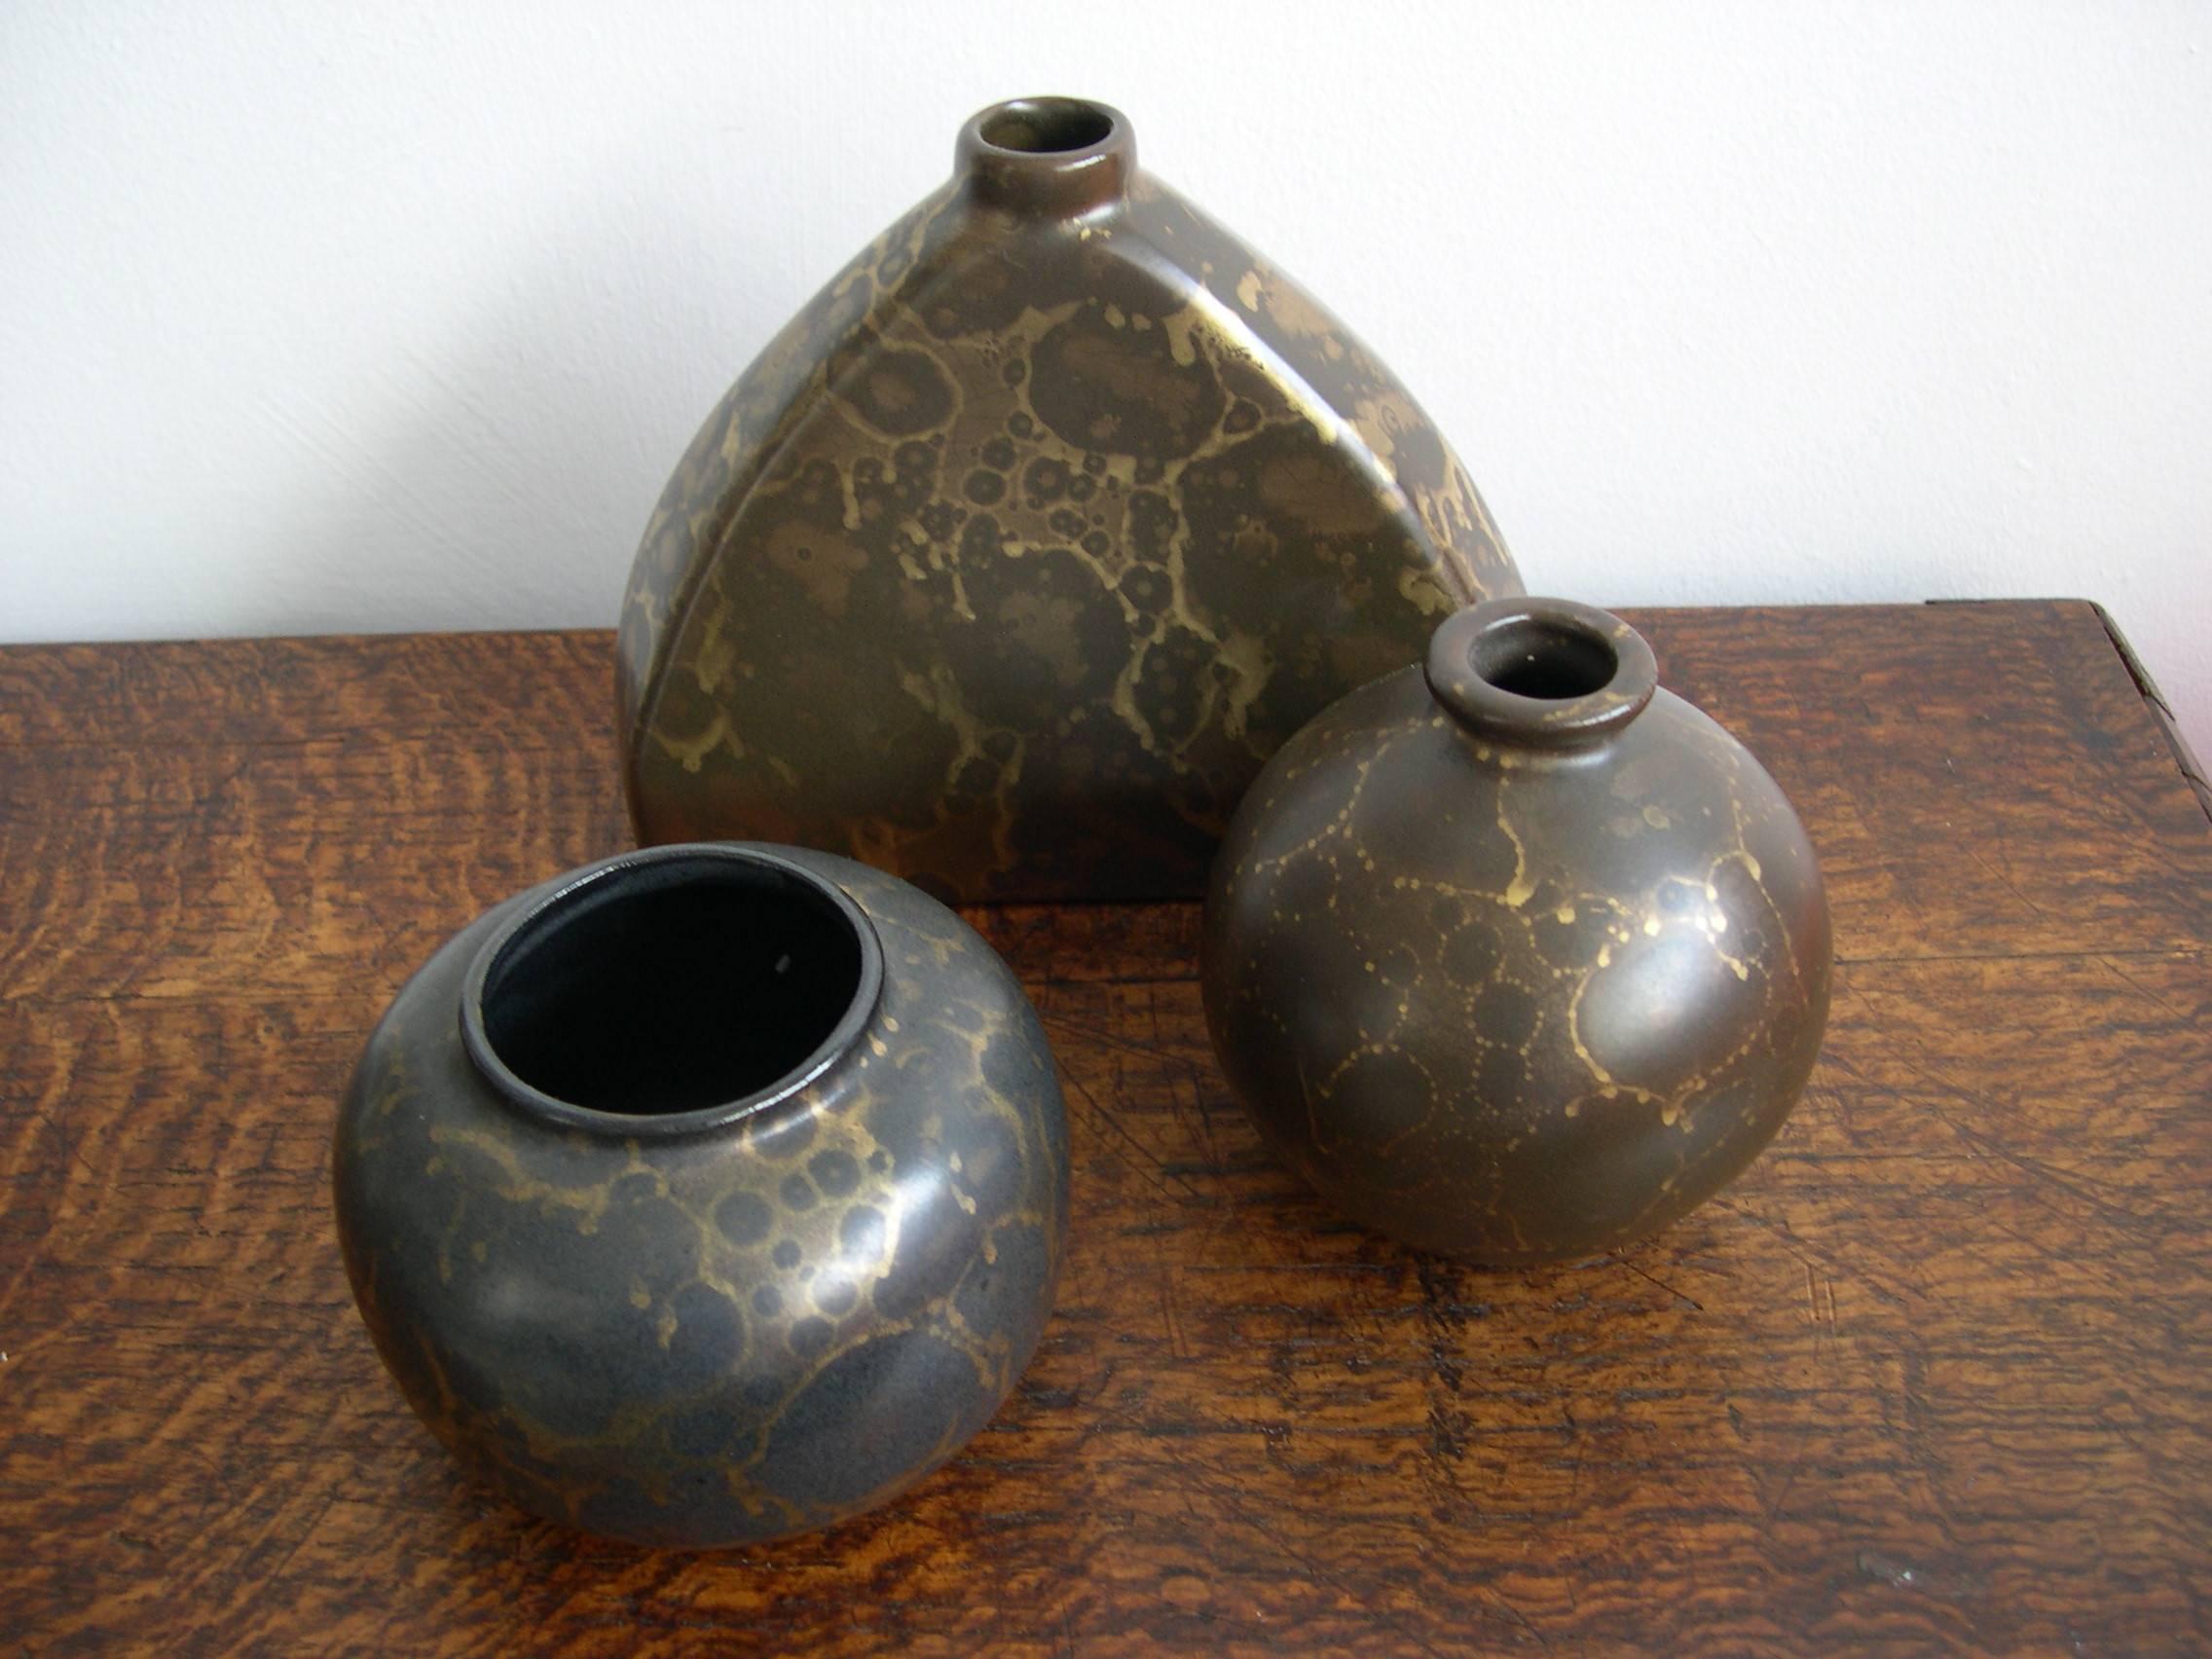 Attractive set of three sculptural vessels by French ceramicist Lucien Brisdoux with gold metallic glazes in various tones. Based out of the Loire, Brisdoux produced these wares for a short period in the 1930s as the manufacturing technique proved